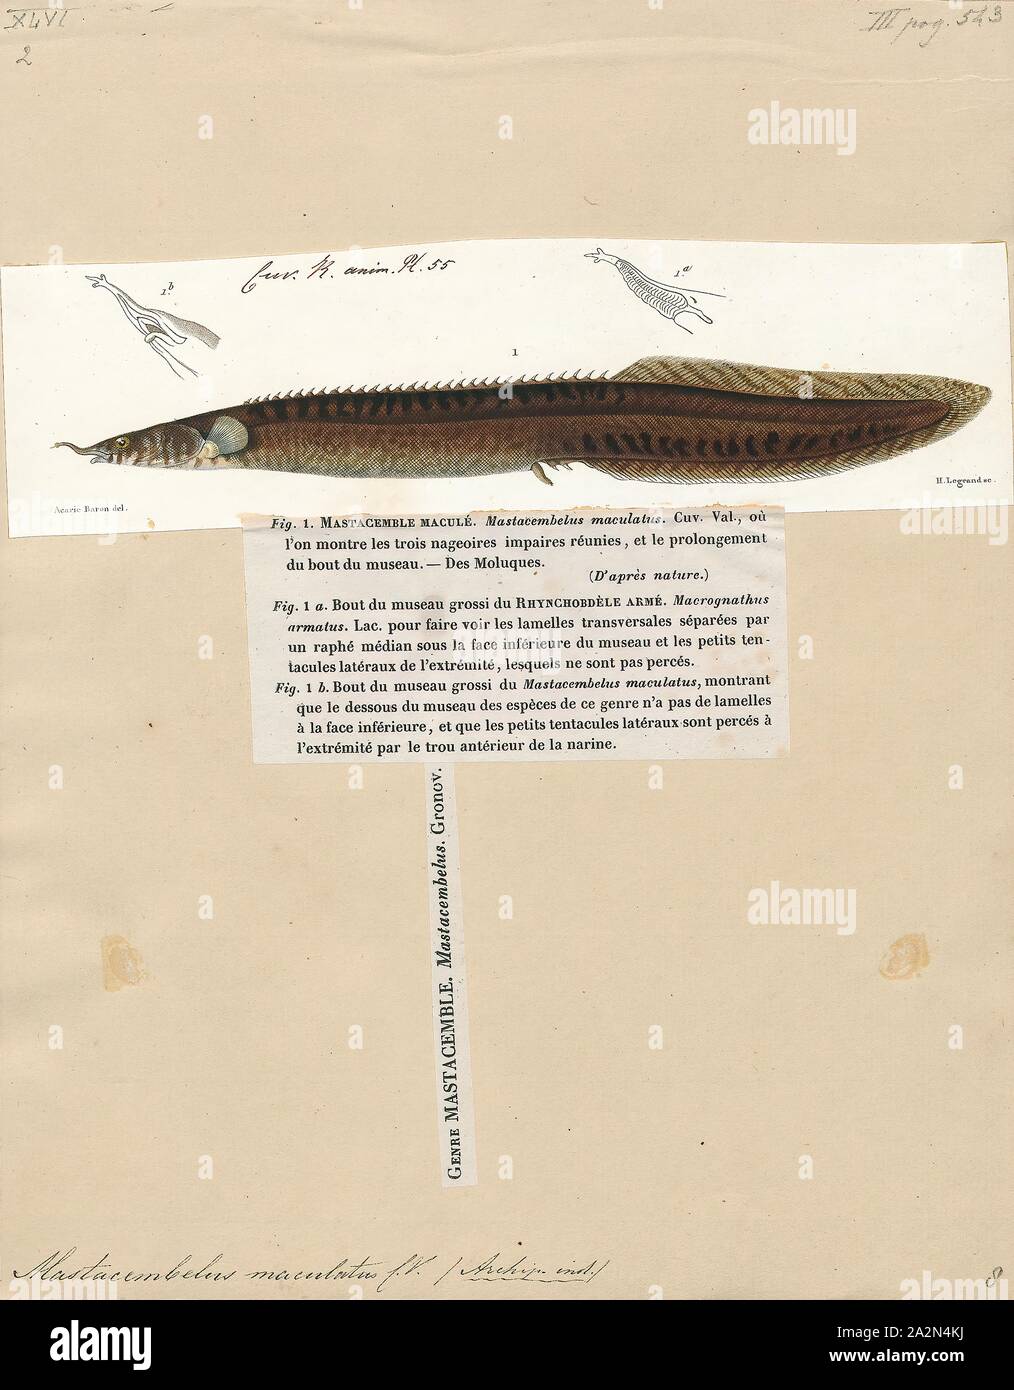 Mastacembelus maculatus, Print, Mastacembelus is a genus of many species of spiny eel fish from the family Mastacembelidae. They are native to Africa (c. 45 species) and Asia (c. 15 species). Most are found in rivers and associated systems (even in rapids), but there are also species in other freshwater habitats and a particularly rich radiation is found in the Lake Tanganyika basin with 15 species (14 endemic). A few species can even occur in brackish water., 1700-1880 Stock Photo